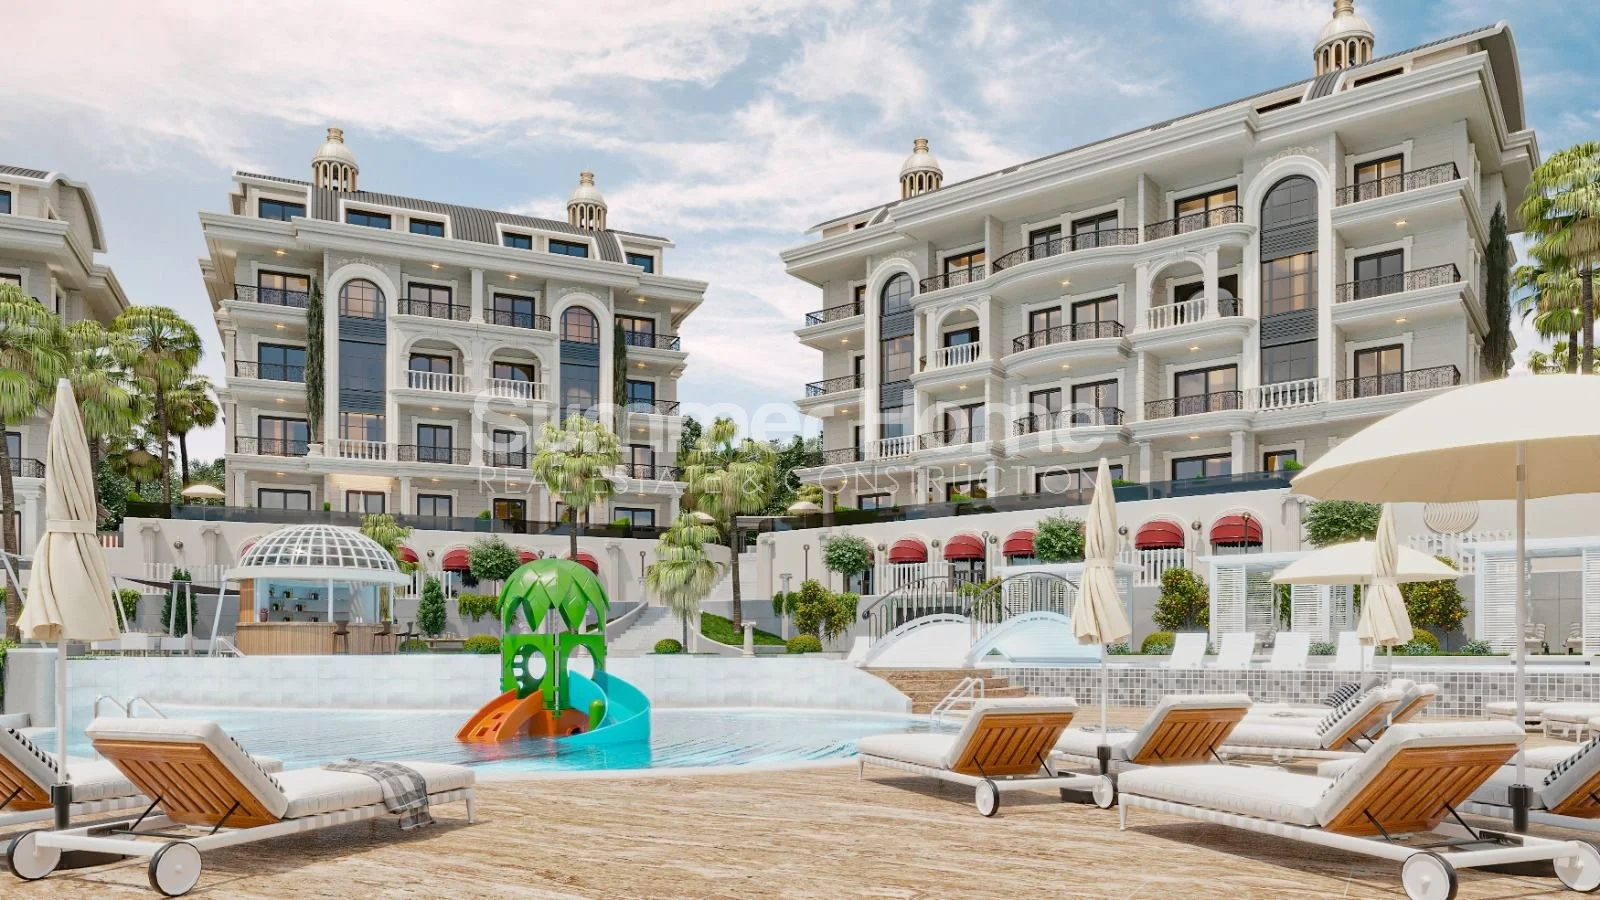 Exquisite Sea View Apartments For Sale in Turkler General - 13